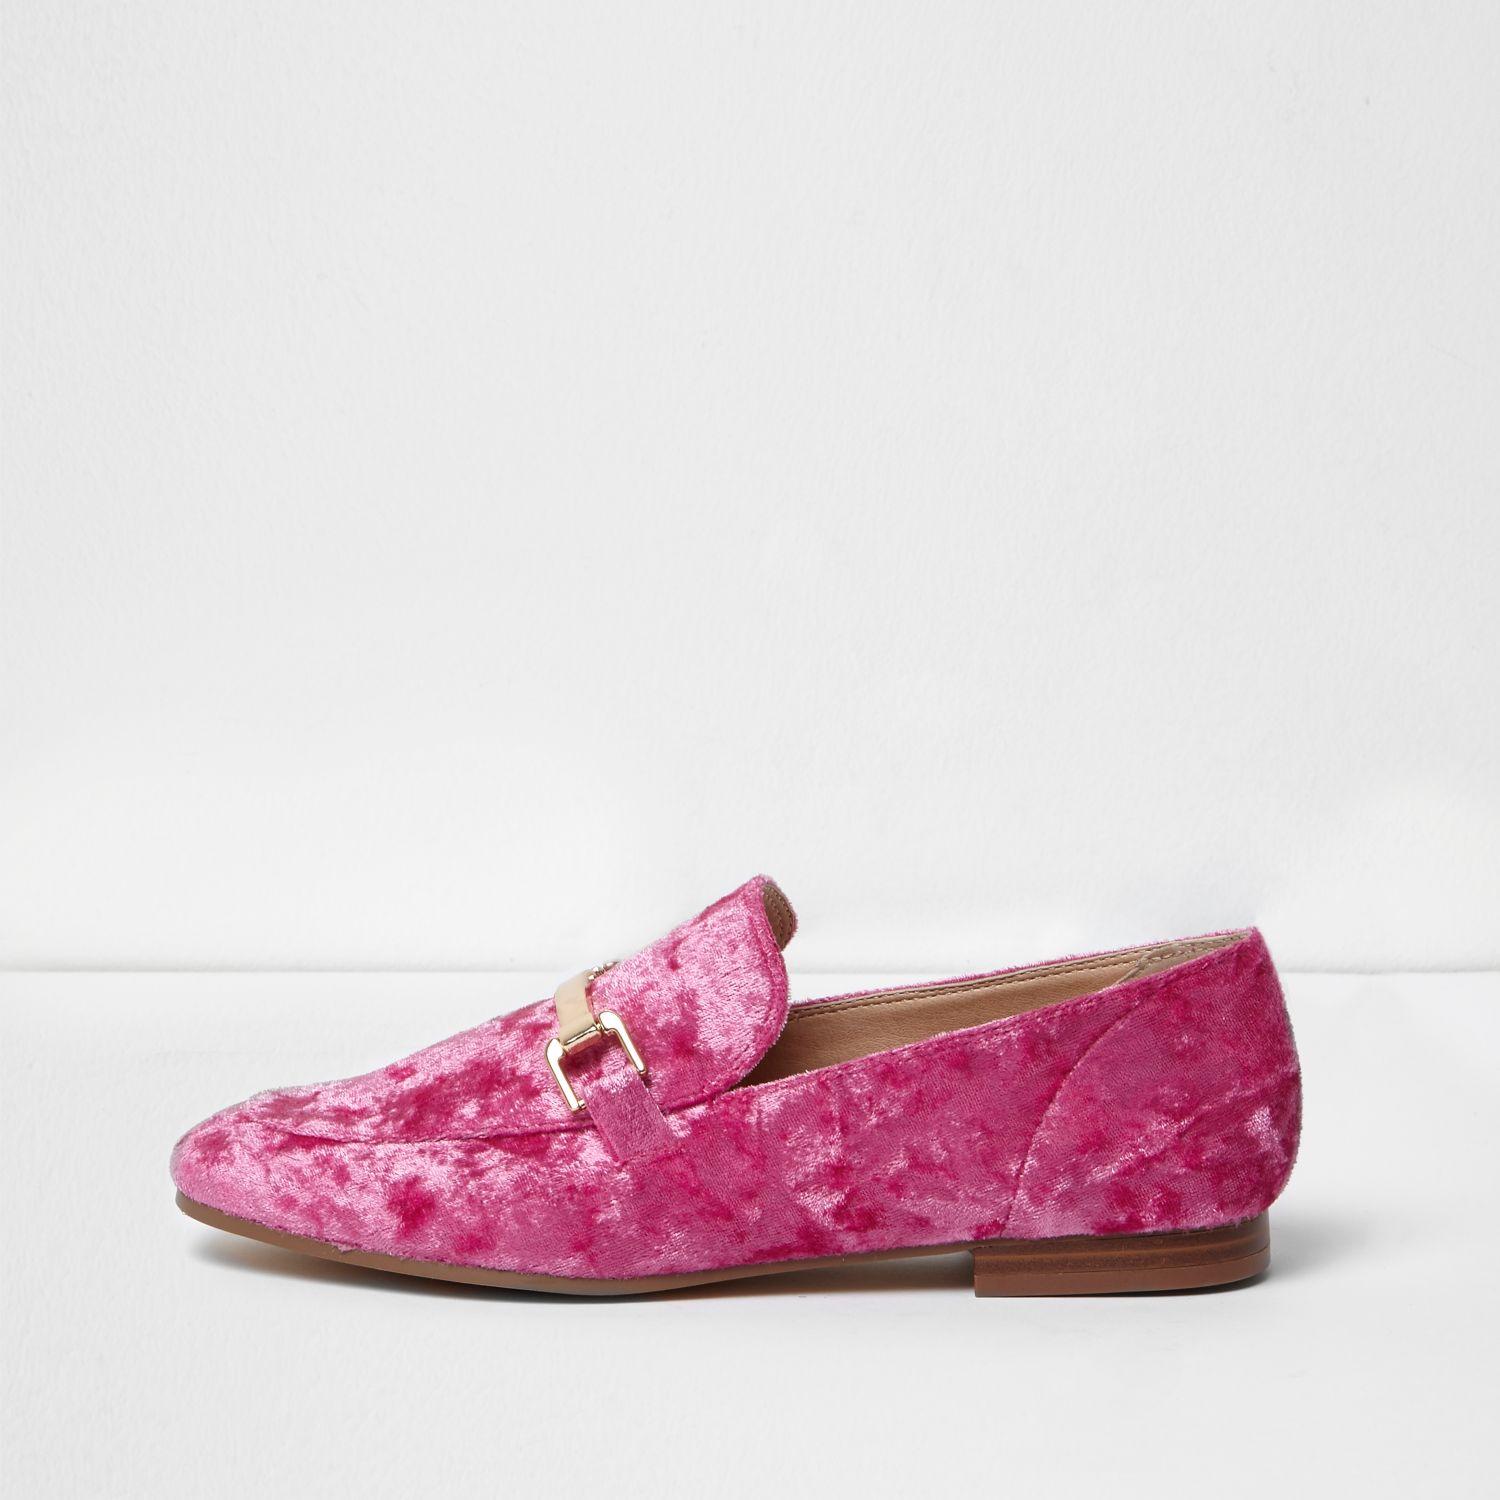 River Island Bright Pink Velvet Loafers - Lyst